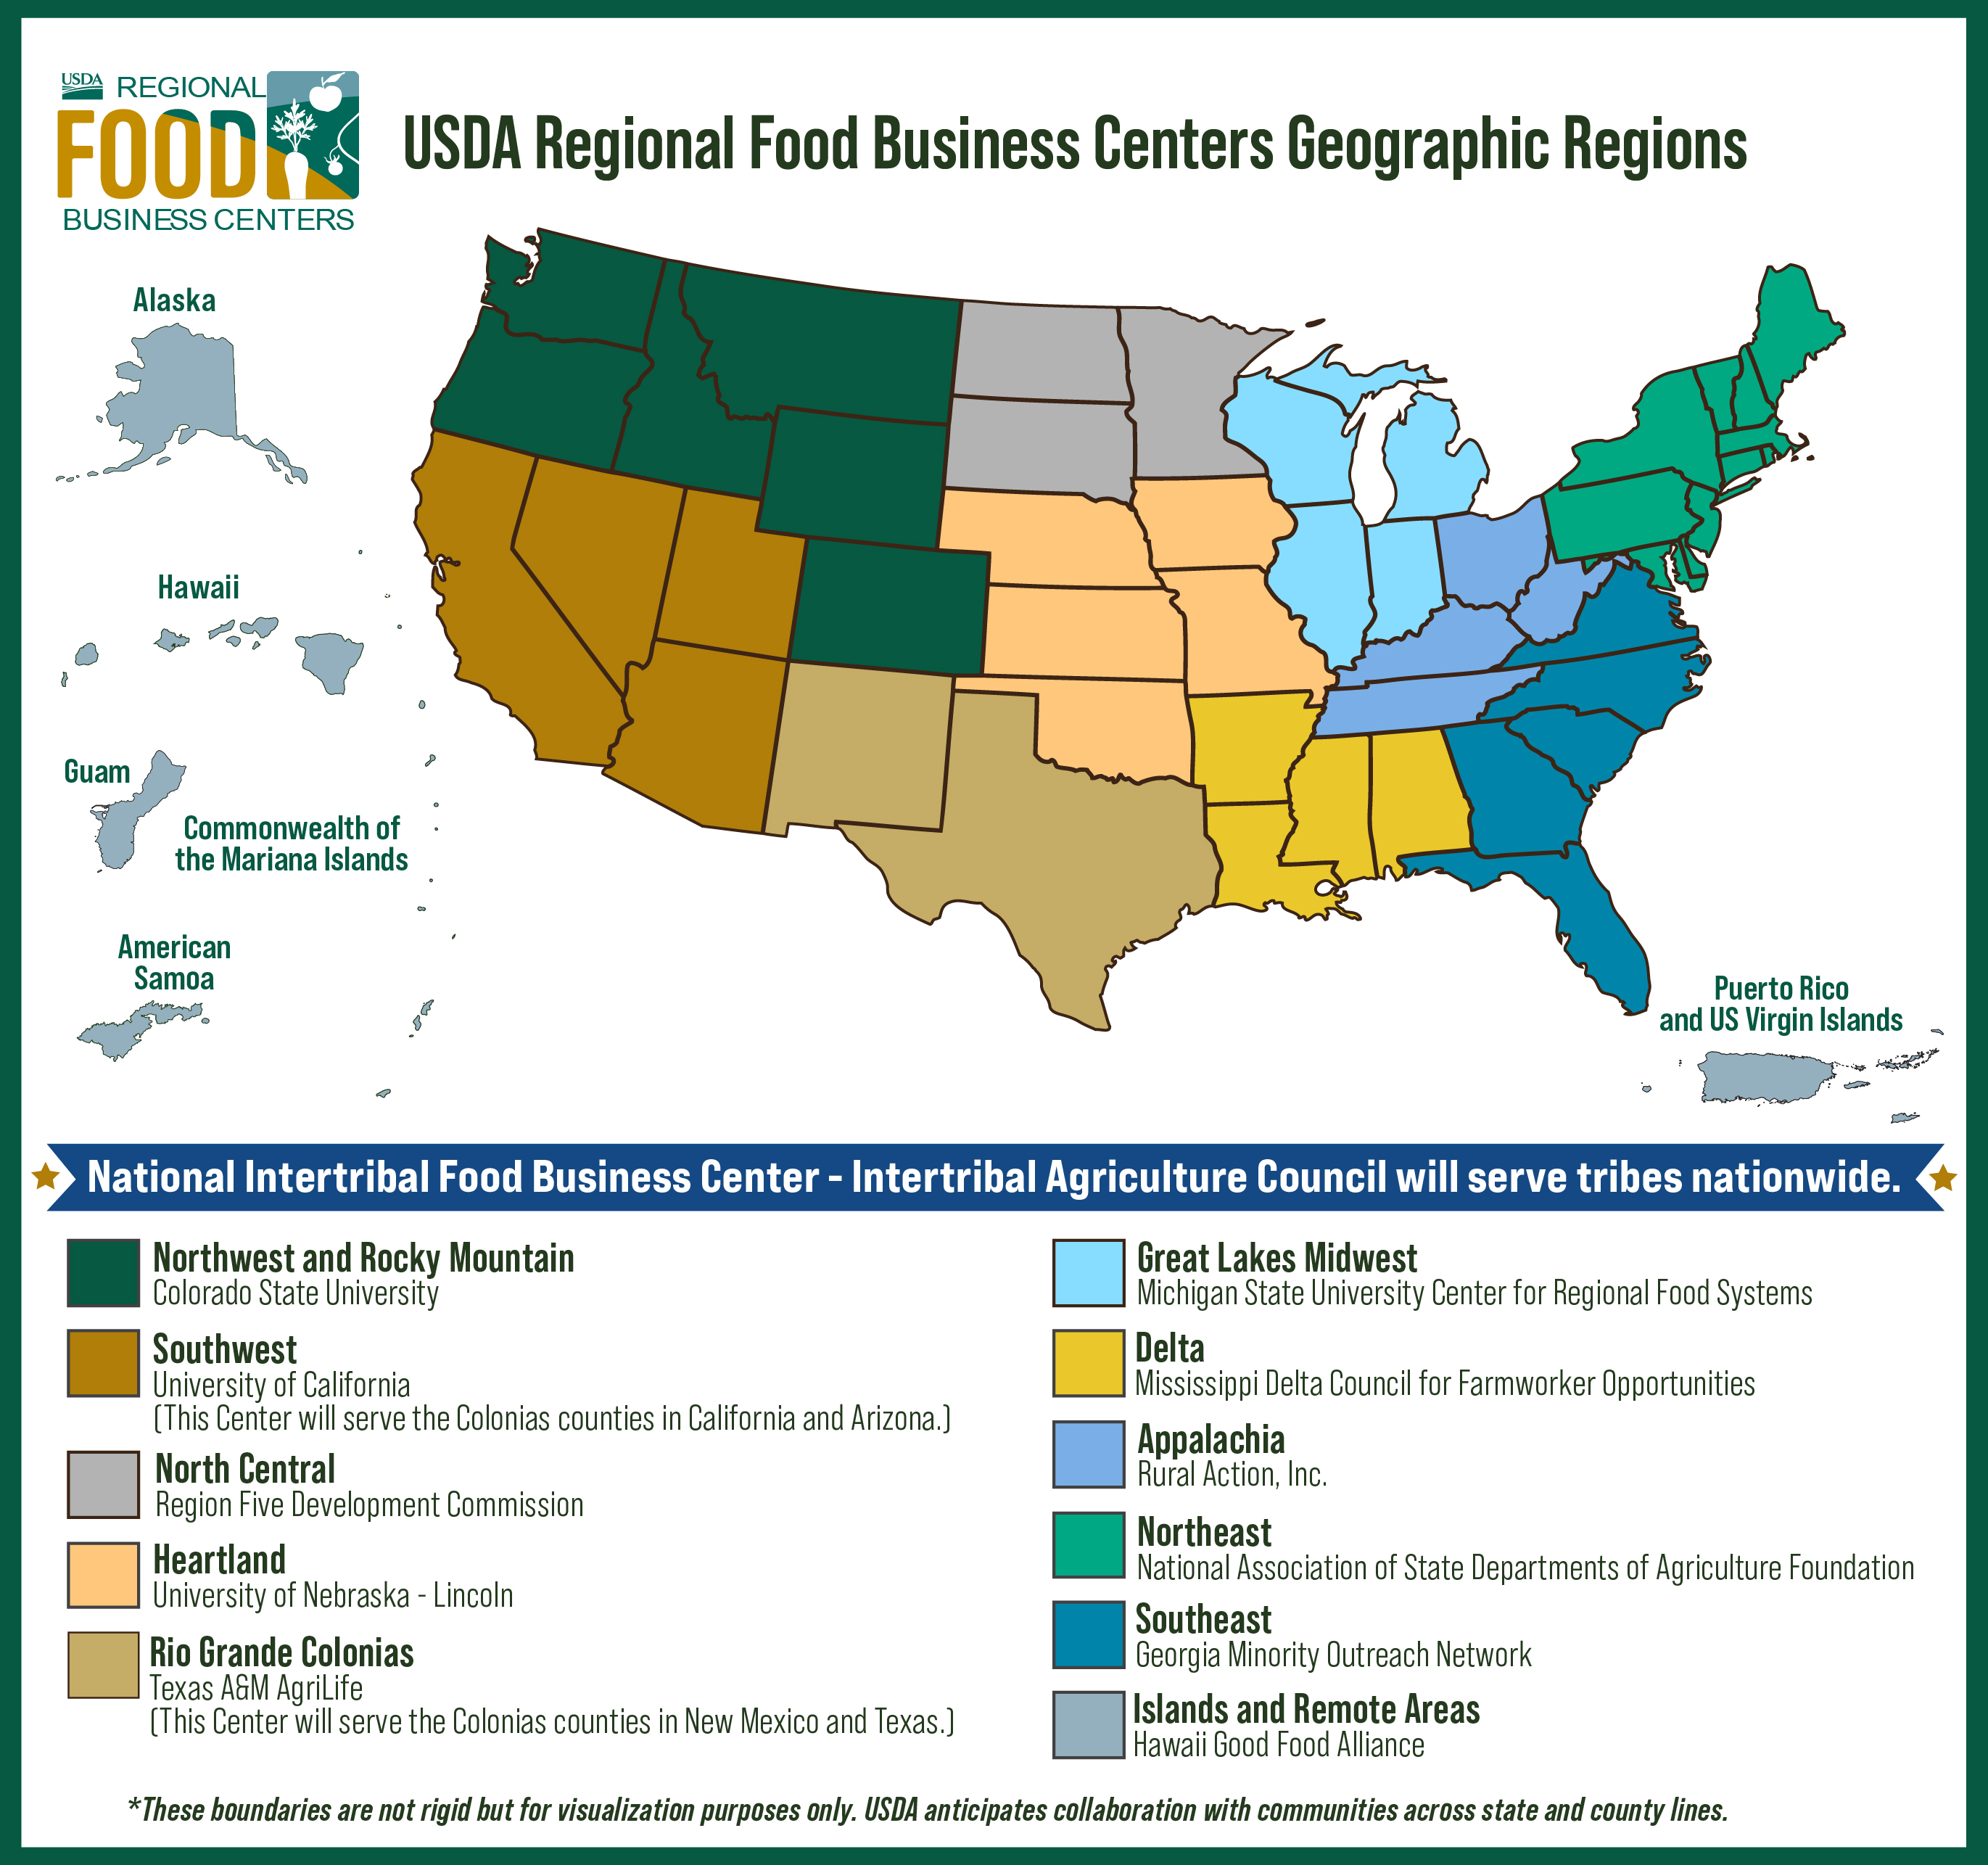 This map of the United States that shows the names of the 12 regional food business centers and their associated regions. The centers are named National Intertribal Food Business Center, Northwest and Rocky Mountains Food Business Center, Southwest Food Business Center, North Central Food Business Center, Heartland Food Business Center, Rio Grande ColoniasFood Business Center, Great Lakes Midwest Food Business Center, Delta Food Business Center, Appalachia Food Business Center, Northeast Food Business Center, Southwest Food Business Center, and Island and Remote Areas Food Business Center.  Clicking on this map will open a PDF file that describes the regions in more detail.